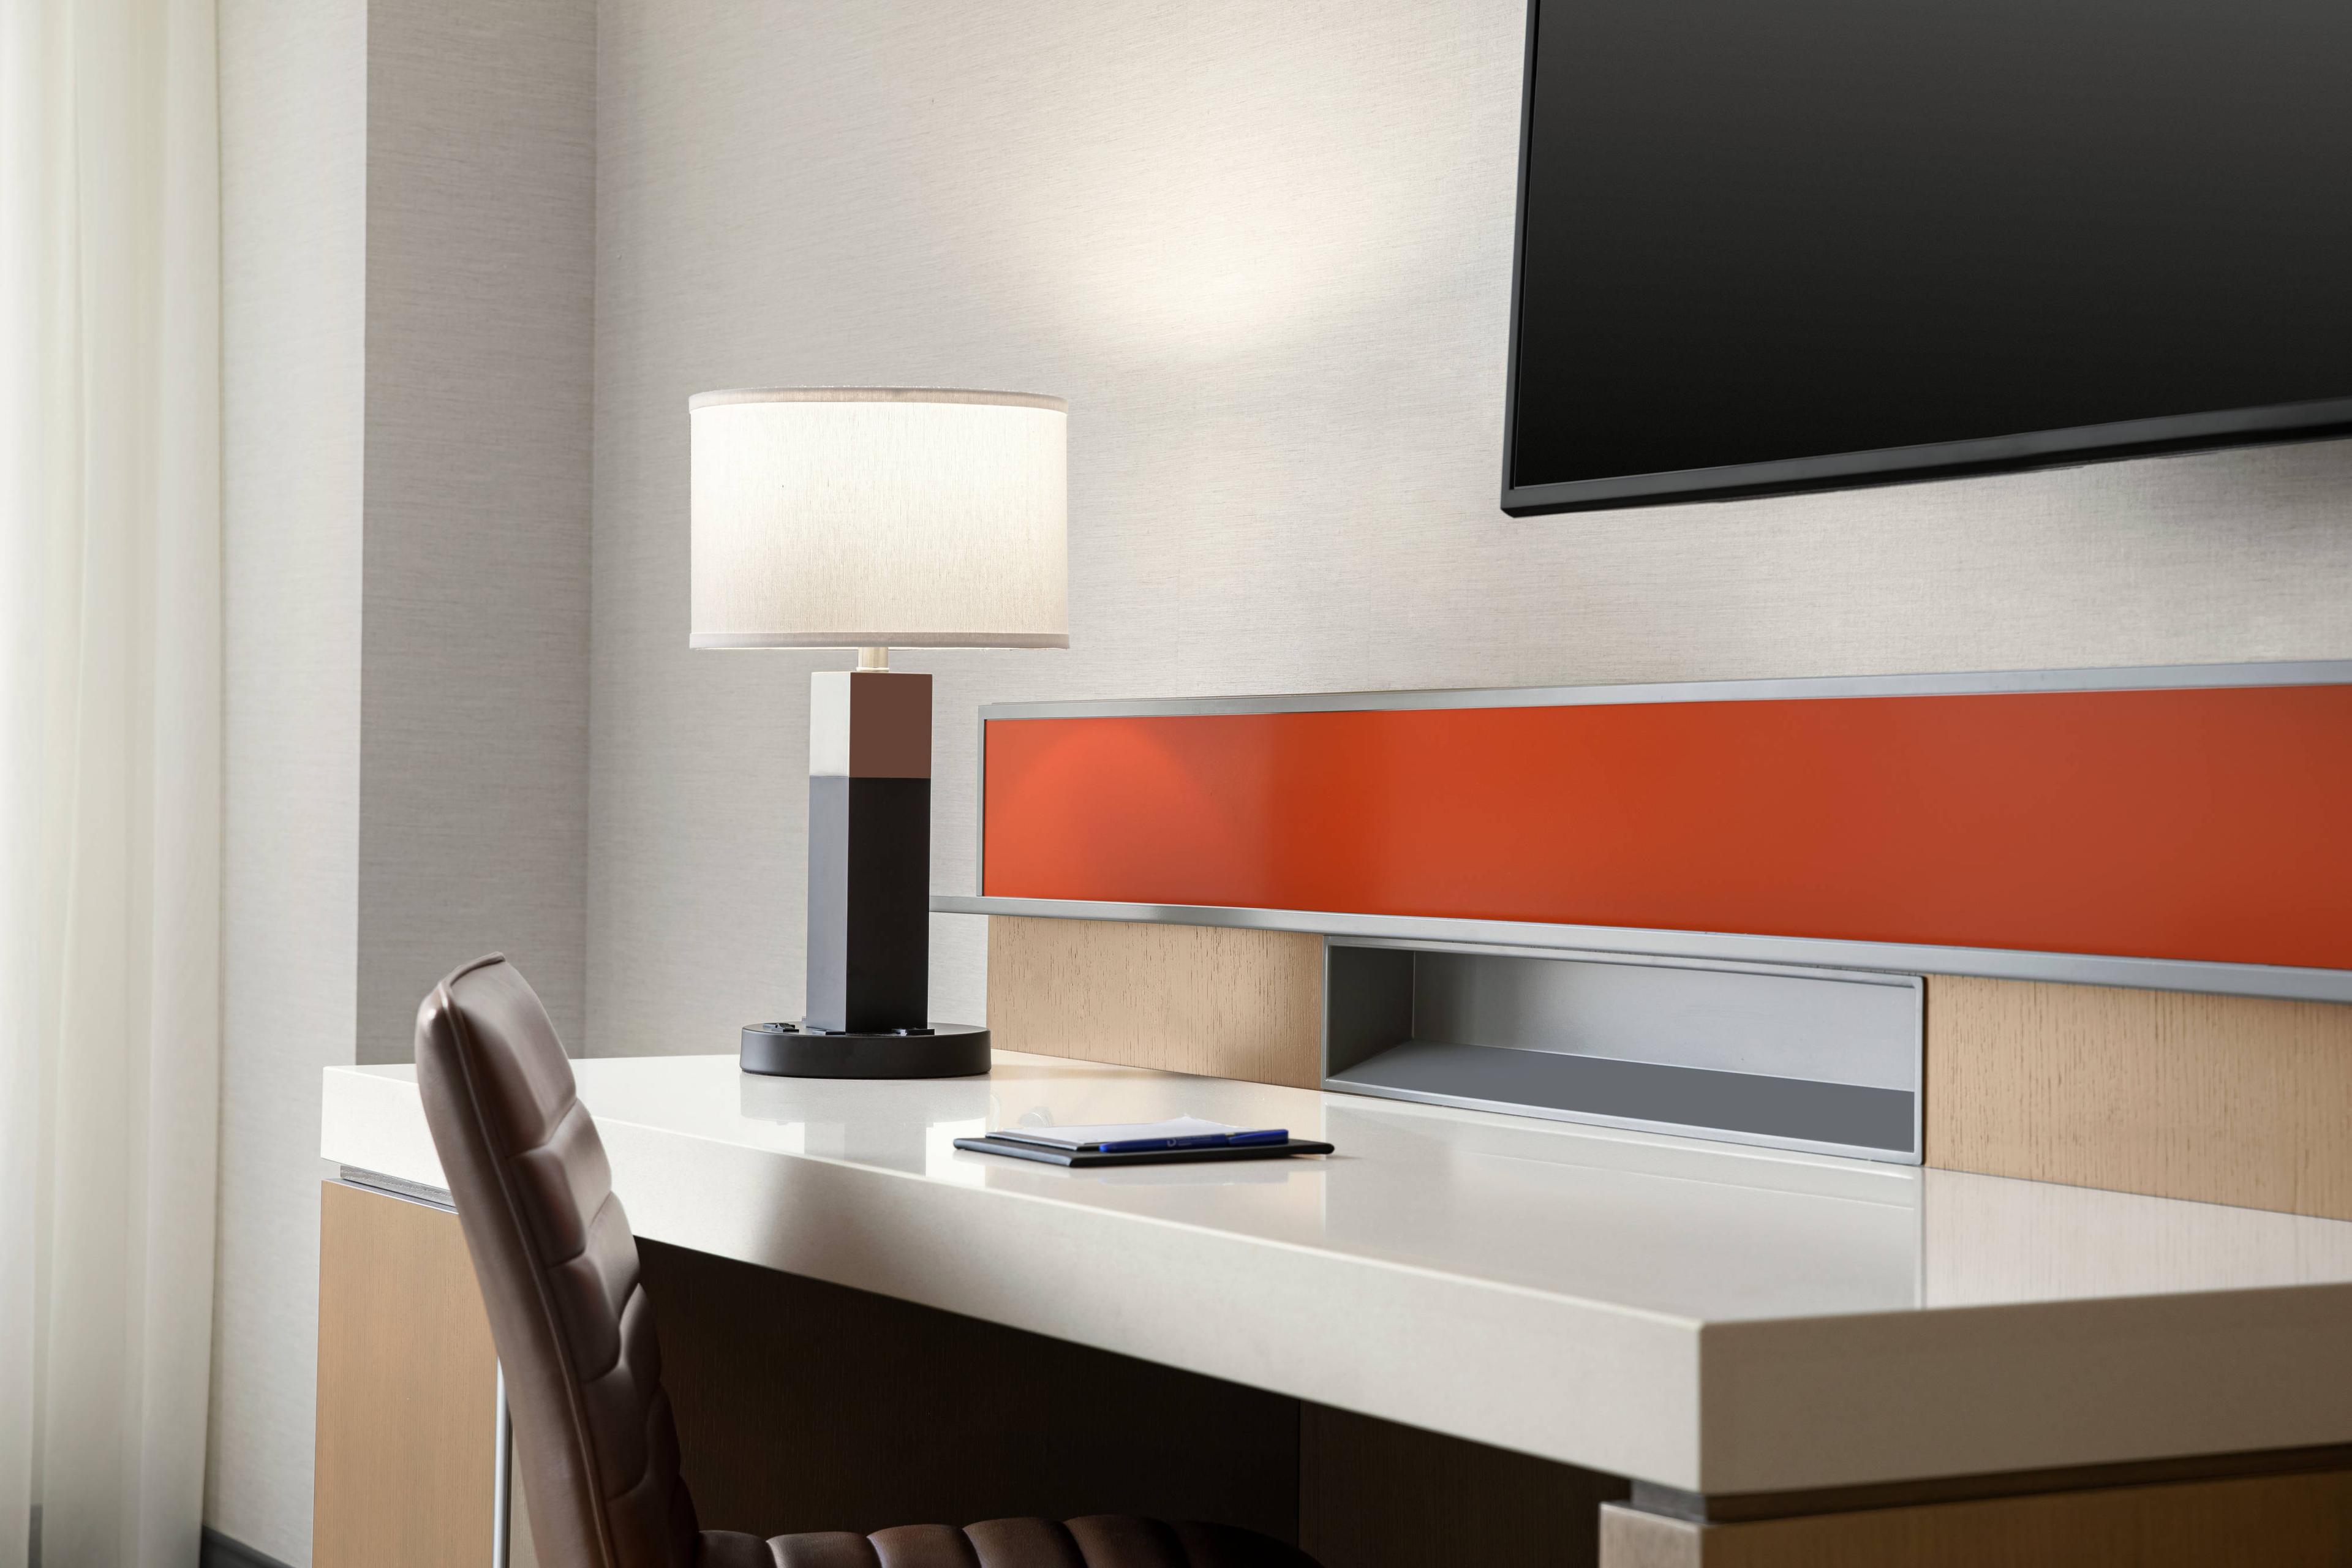 Spacious work area to include comfortable seating, data ports, electrical outlets and state of the art high speed wireless internet connectivity throughout your guest room.